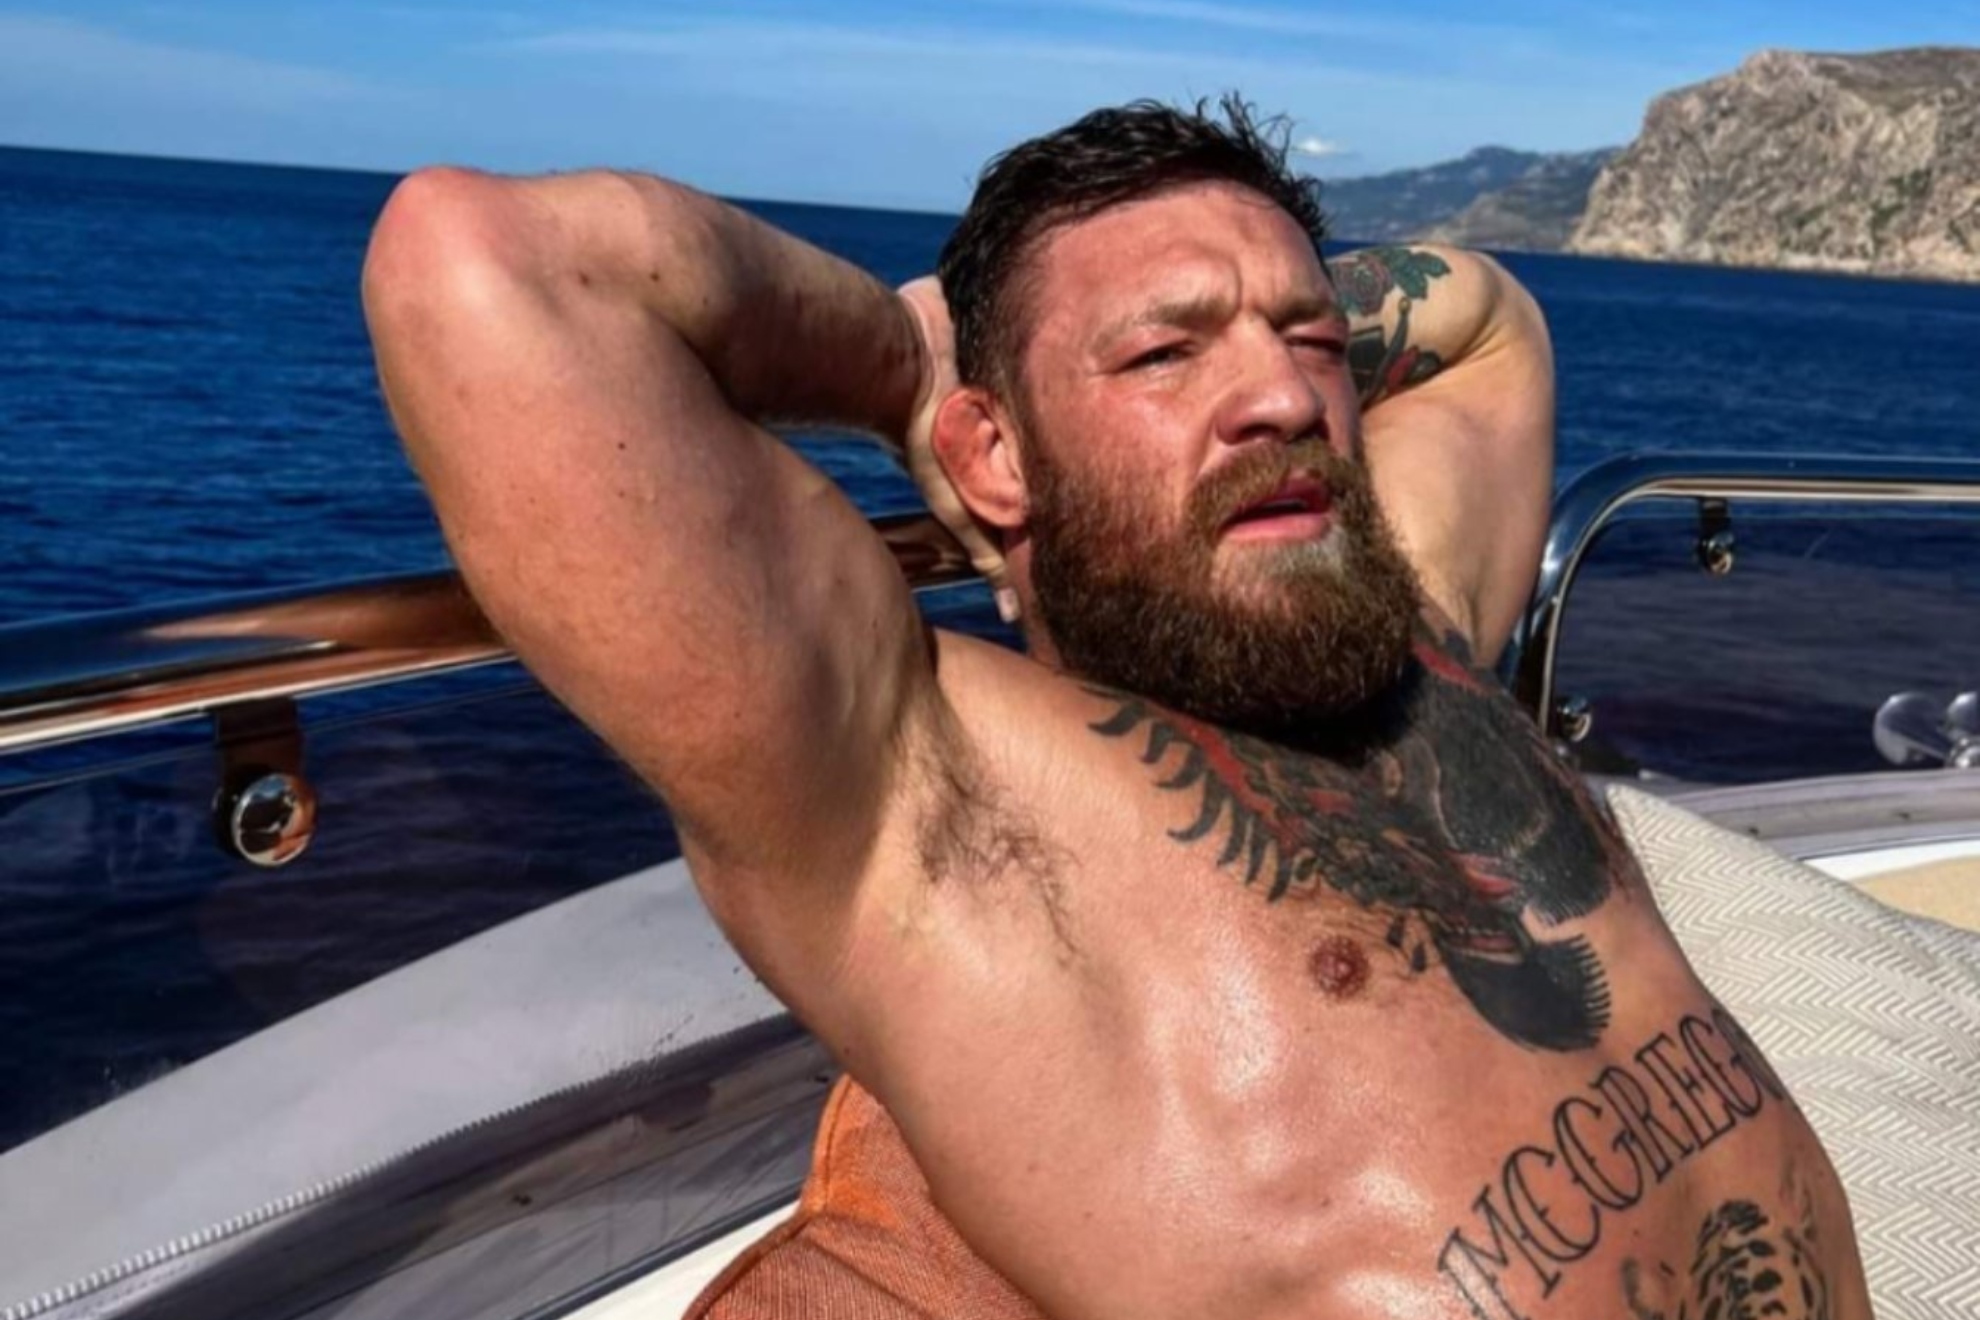 VIDEO: Conor McGregor Takes Driver’s Seat On His Lambo Yacht, Mike Perry and Others  React- “Mac Life”